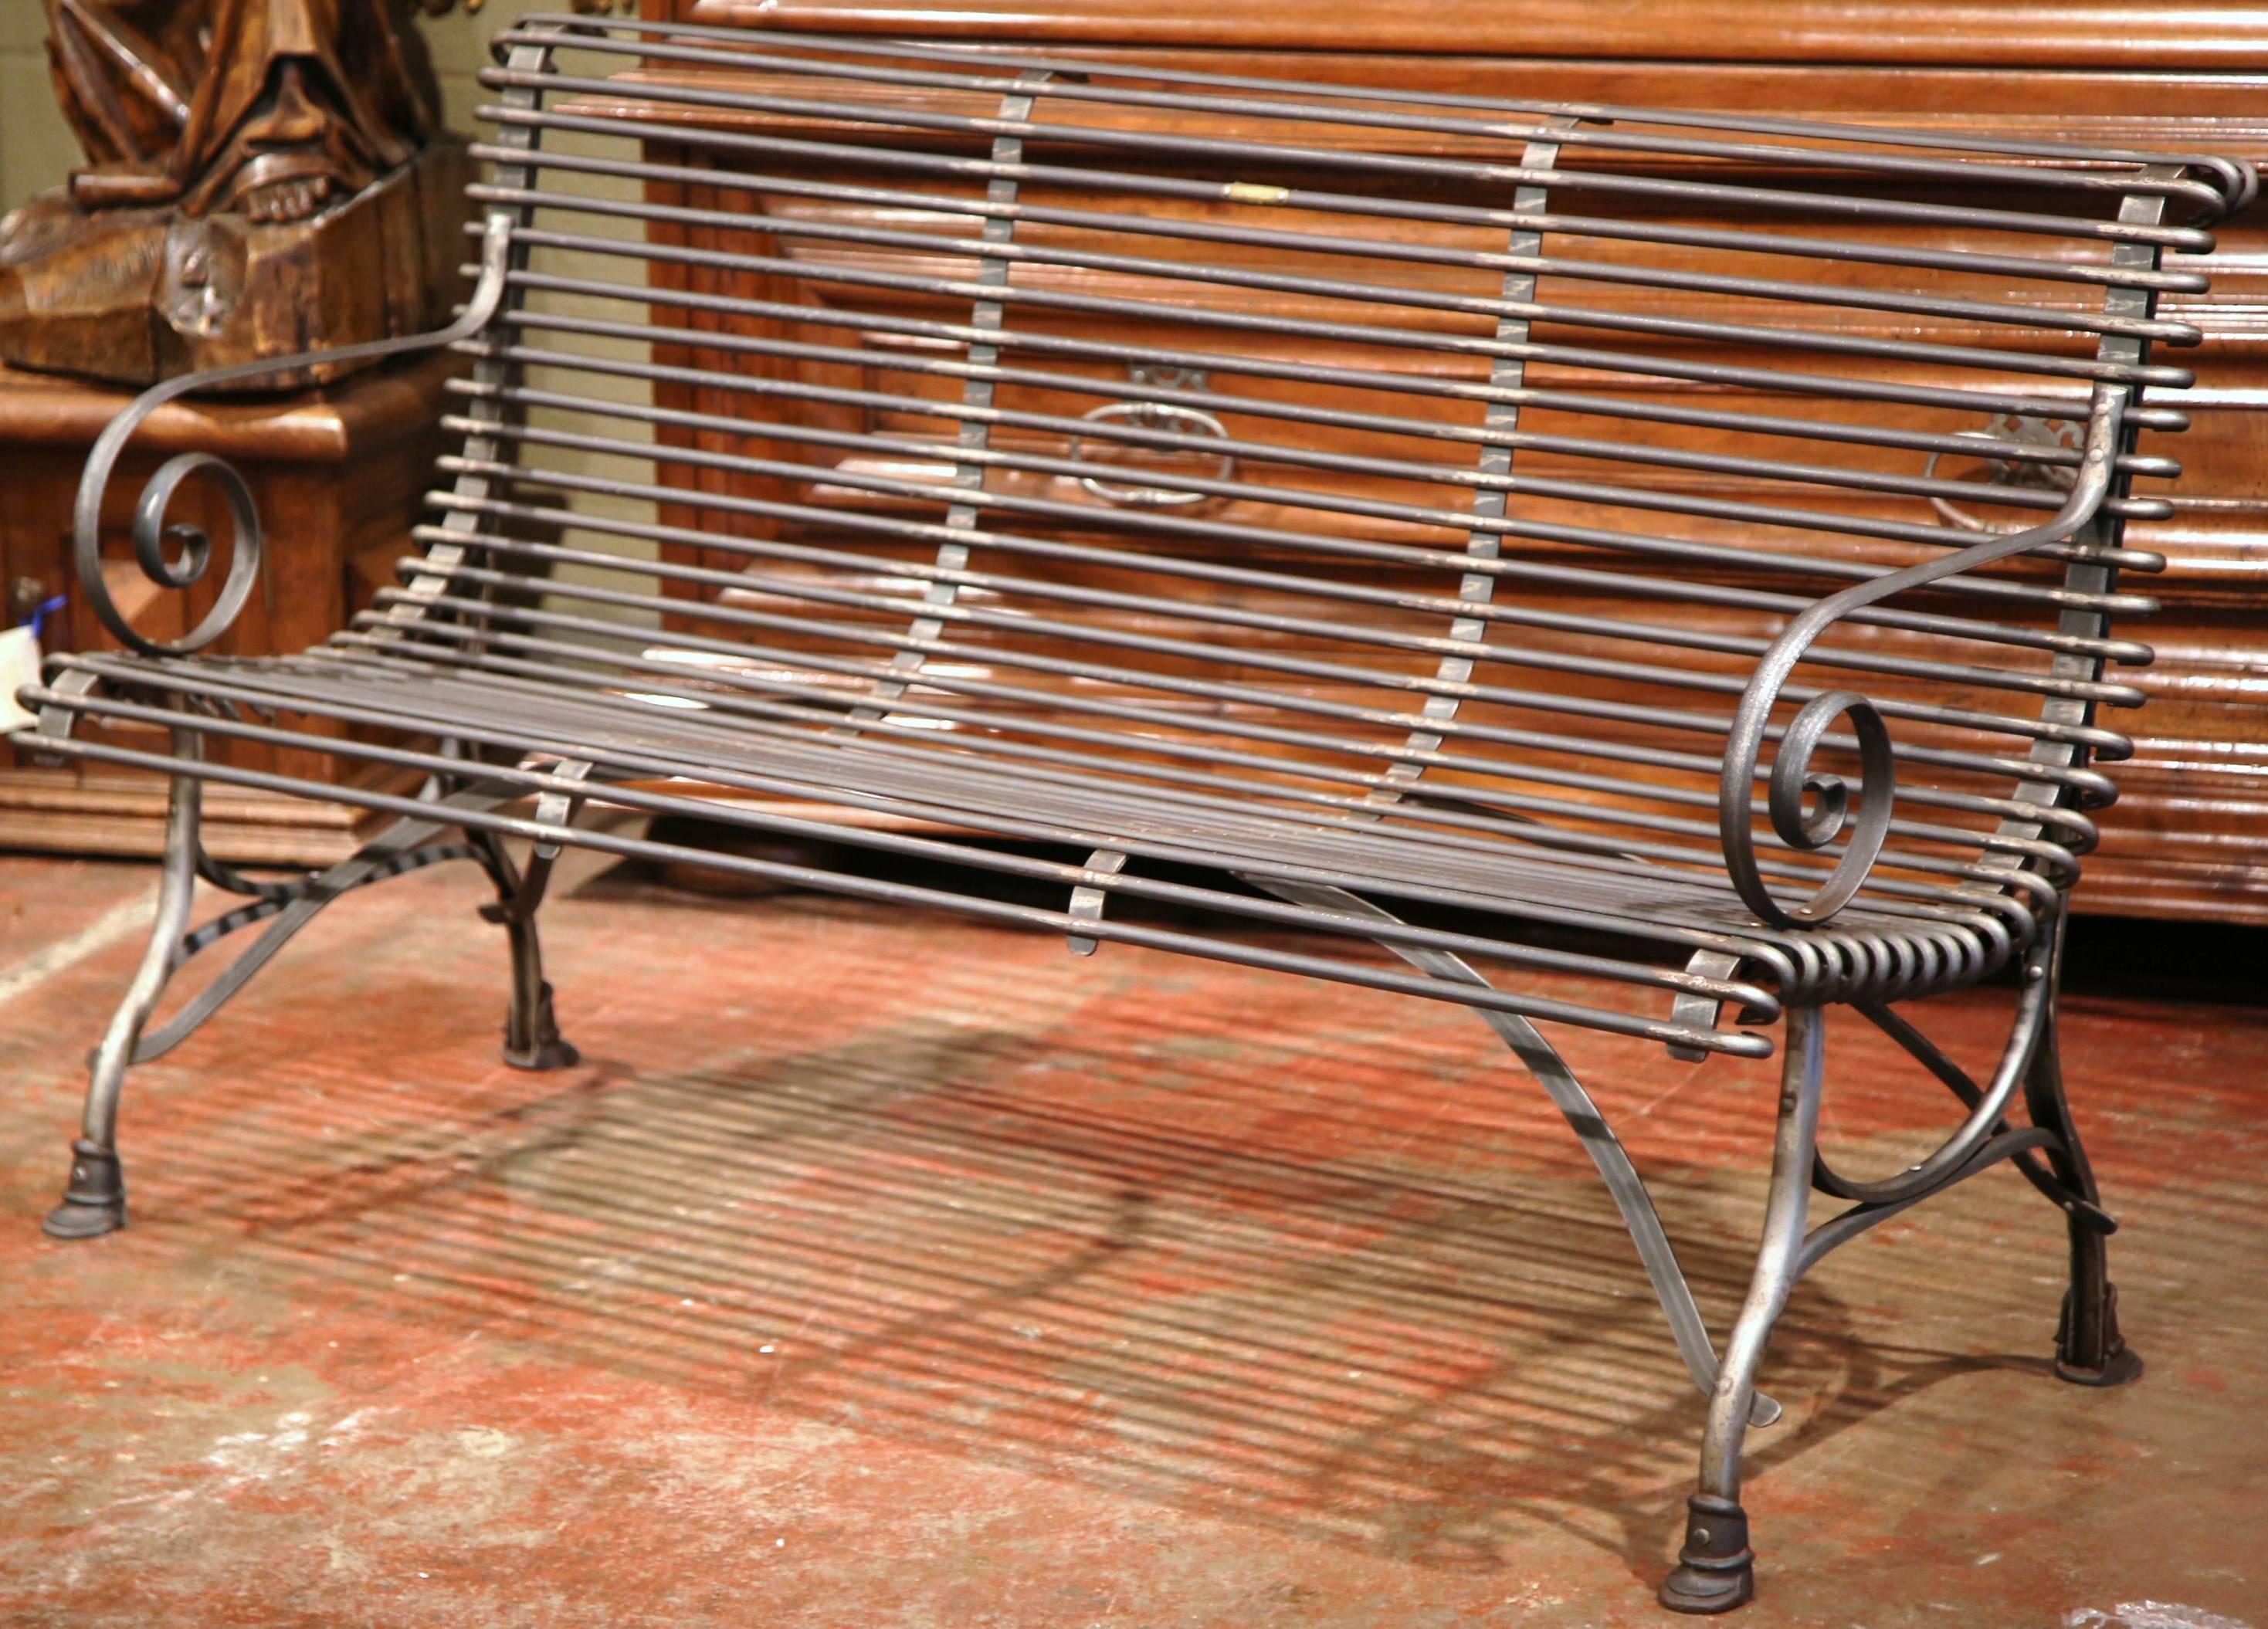 Contemporary French Polished Iron Bench with Scrolled Arms and Hoof Feet Signed Sauveur Arras